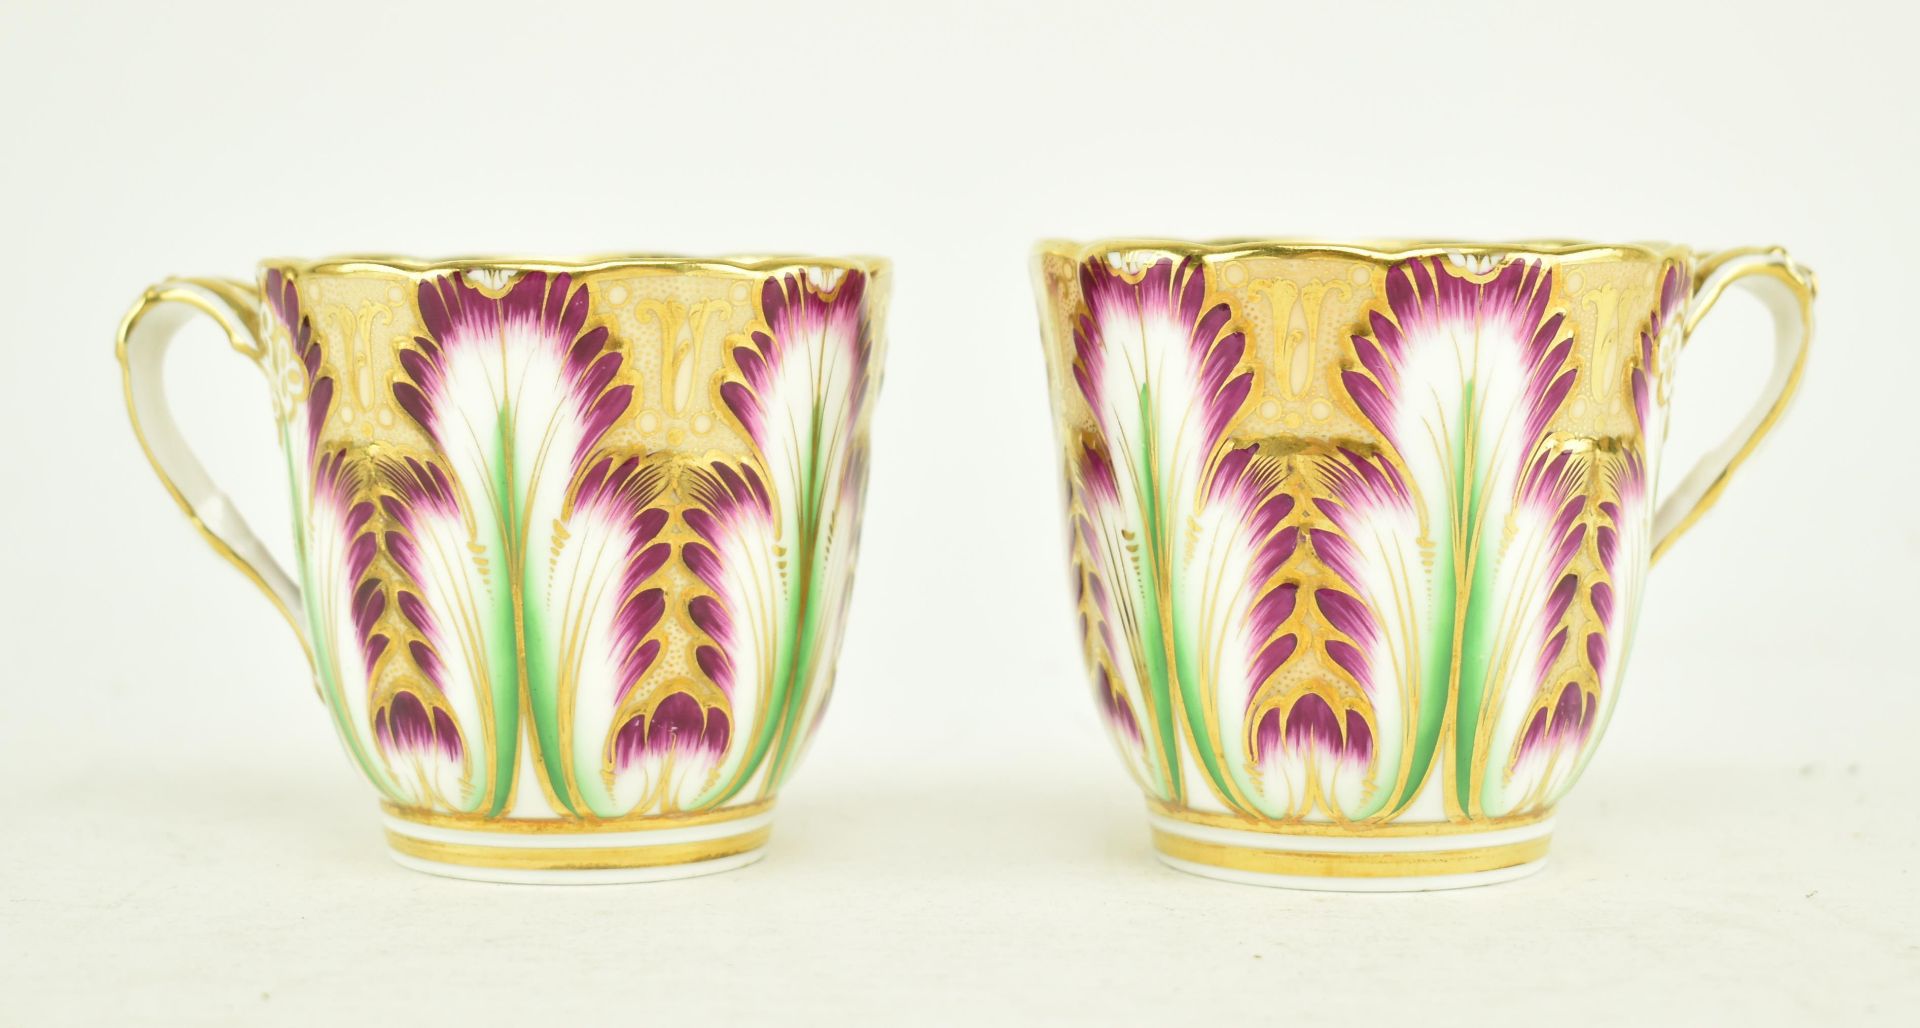 TWO MID 19TH CENTURY RIDGWAY PORCELAIN TEA CUPS WITH HANDLE